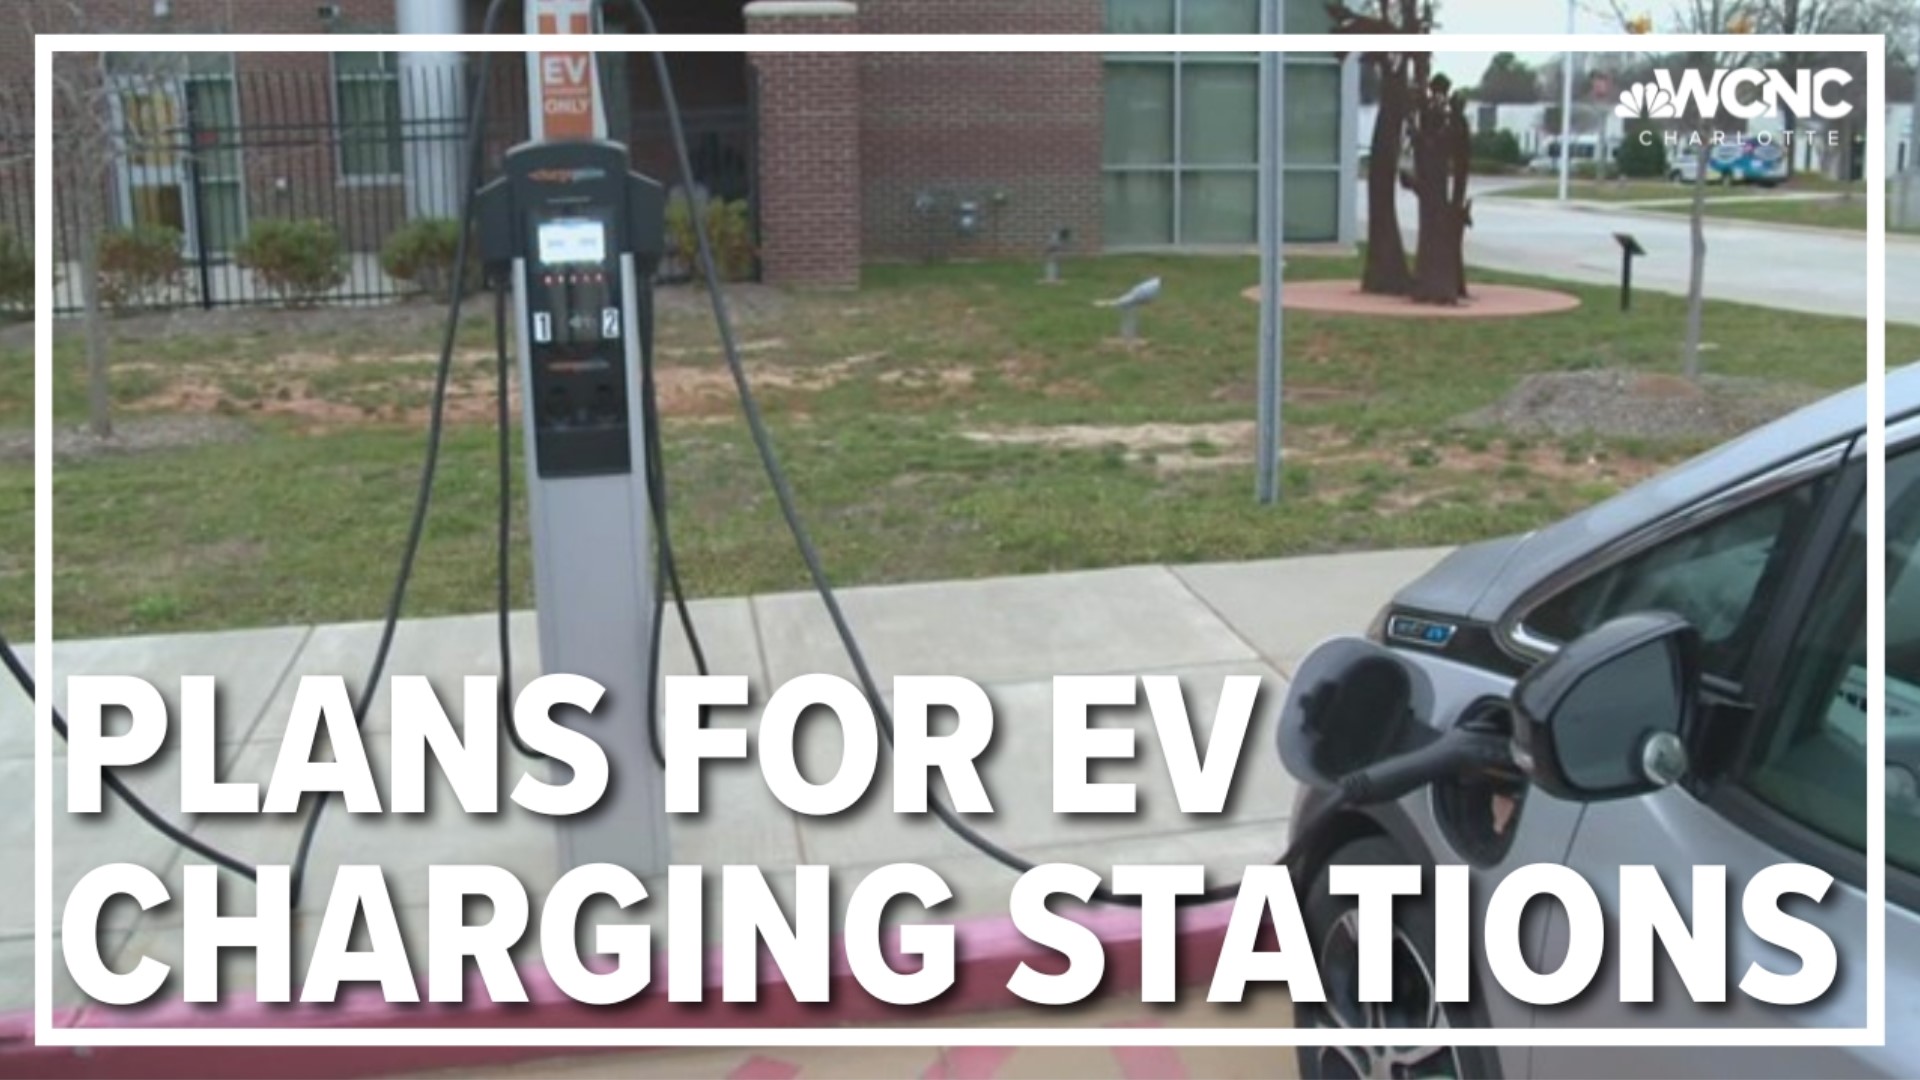 New EV charging stations could be coming to Rock Hill.